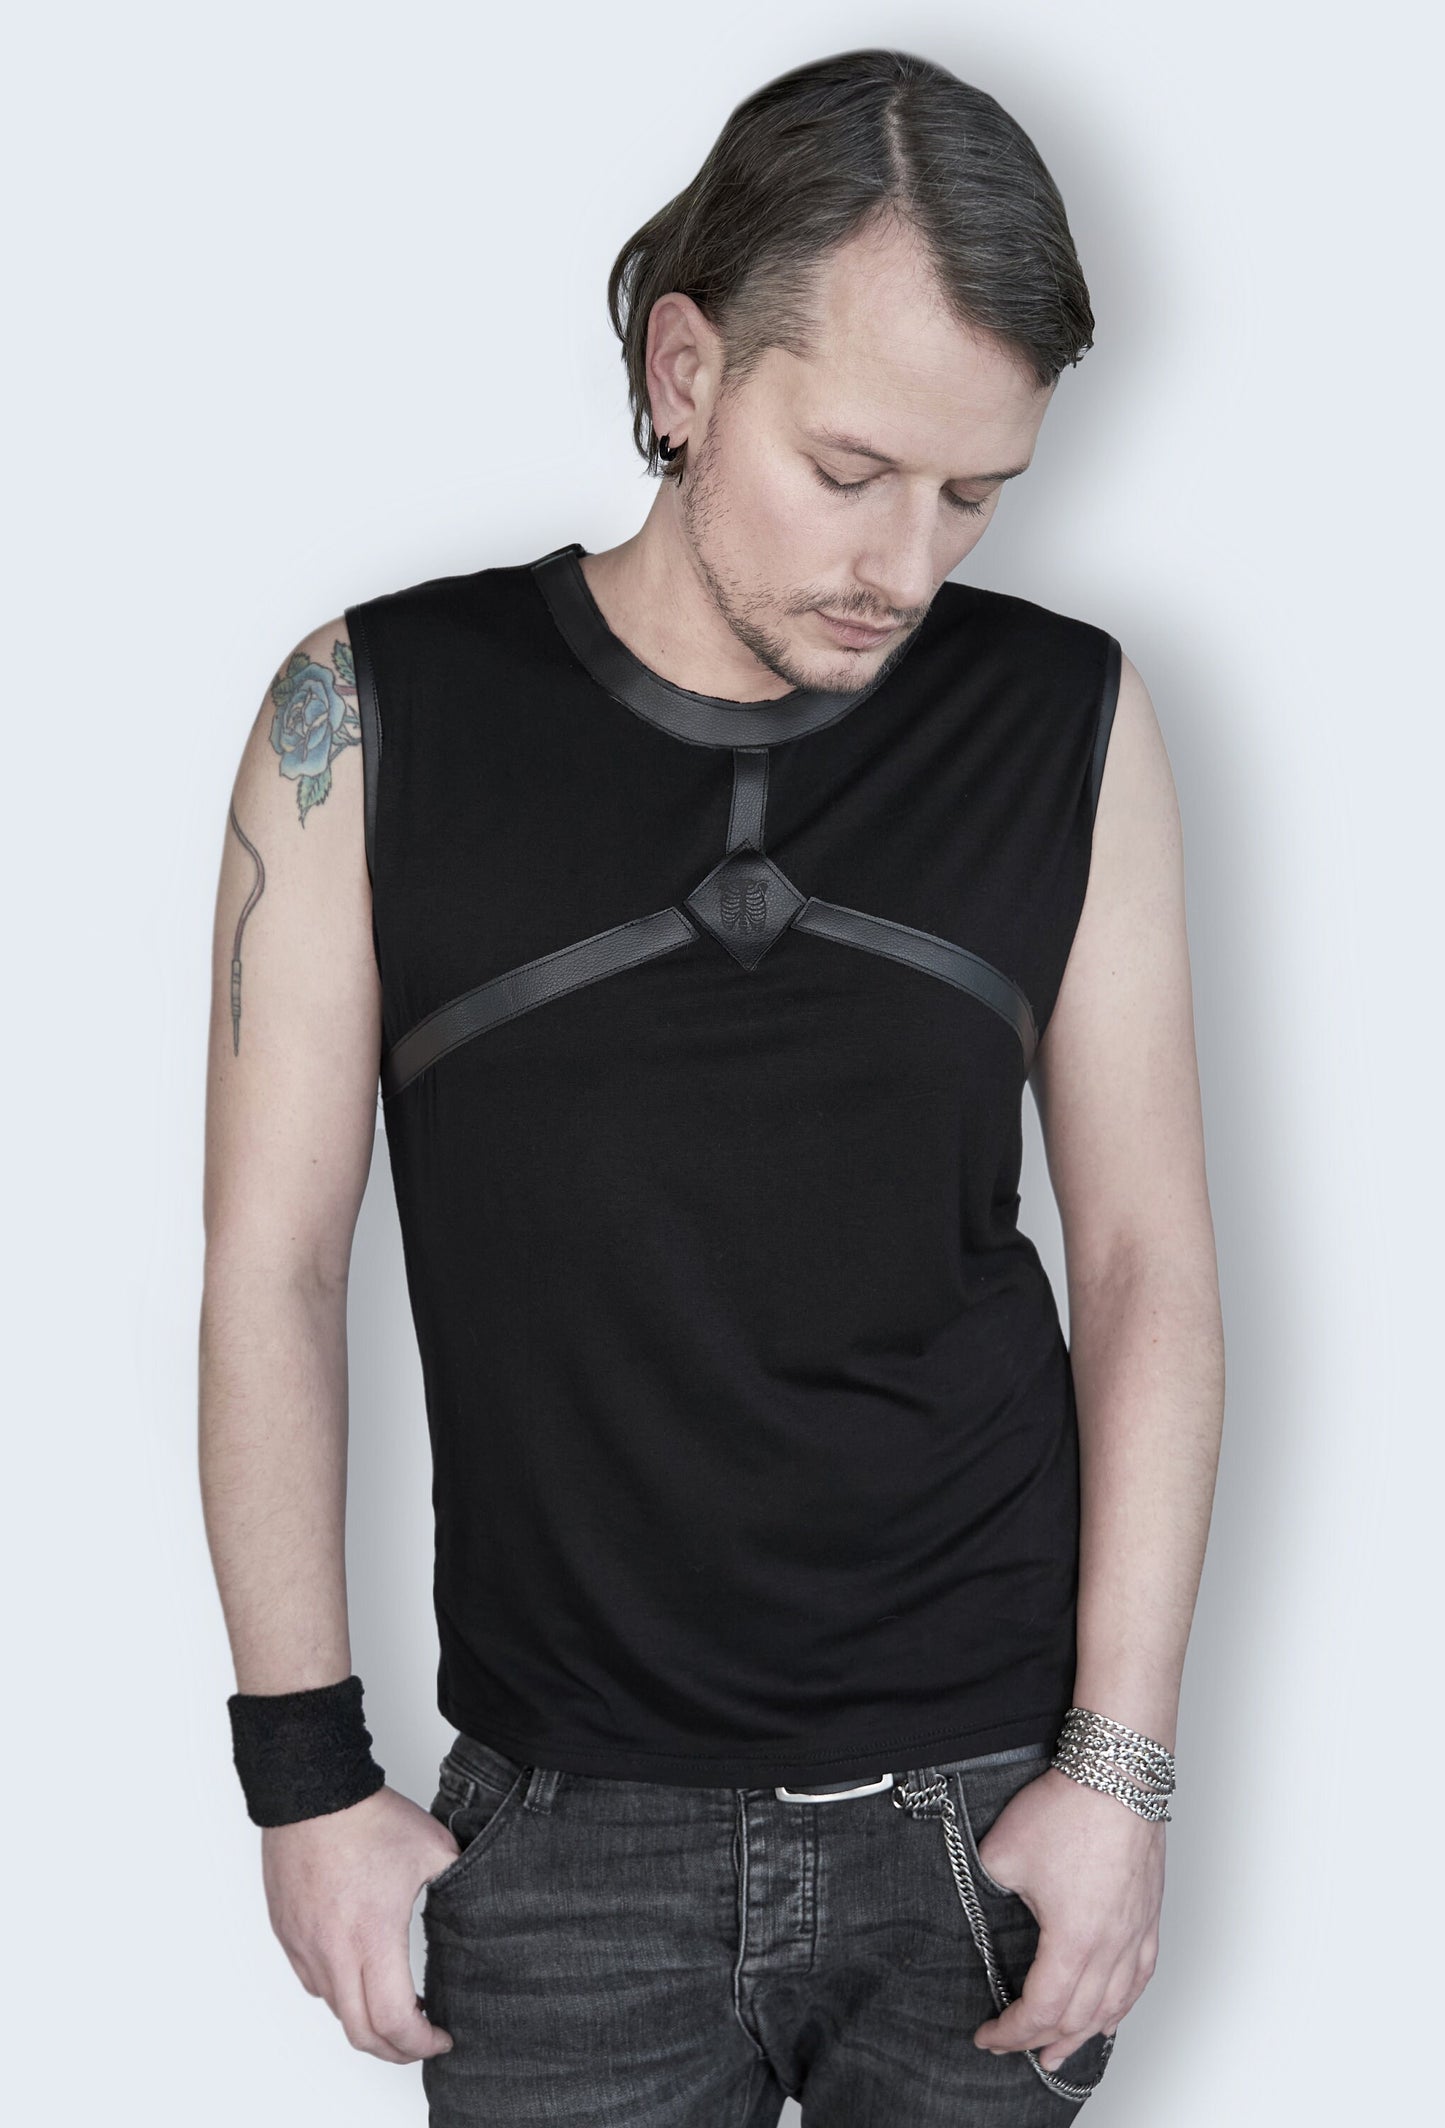 Unisex leather harness goth tank top occult shirt | goth shirt men metal tank top | leather shirt muscle top dark academia shirt